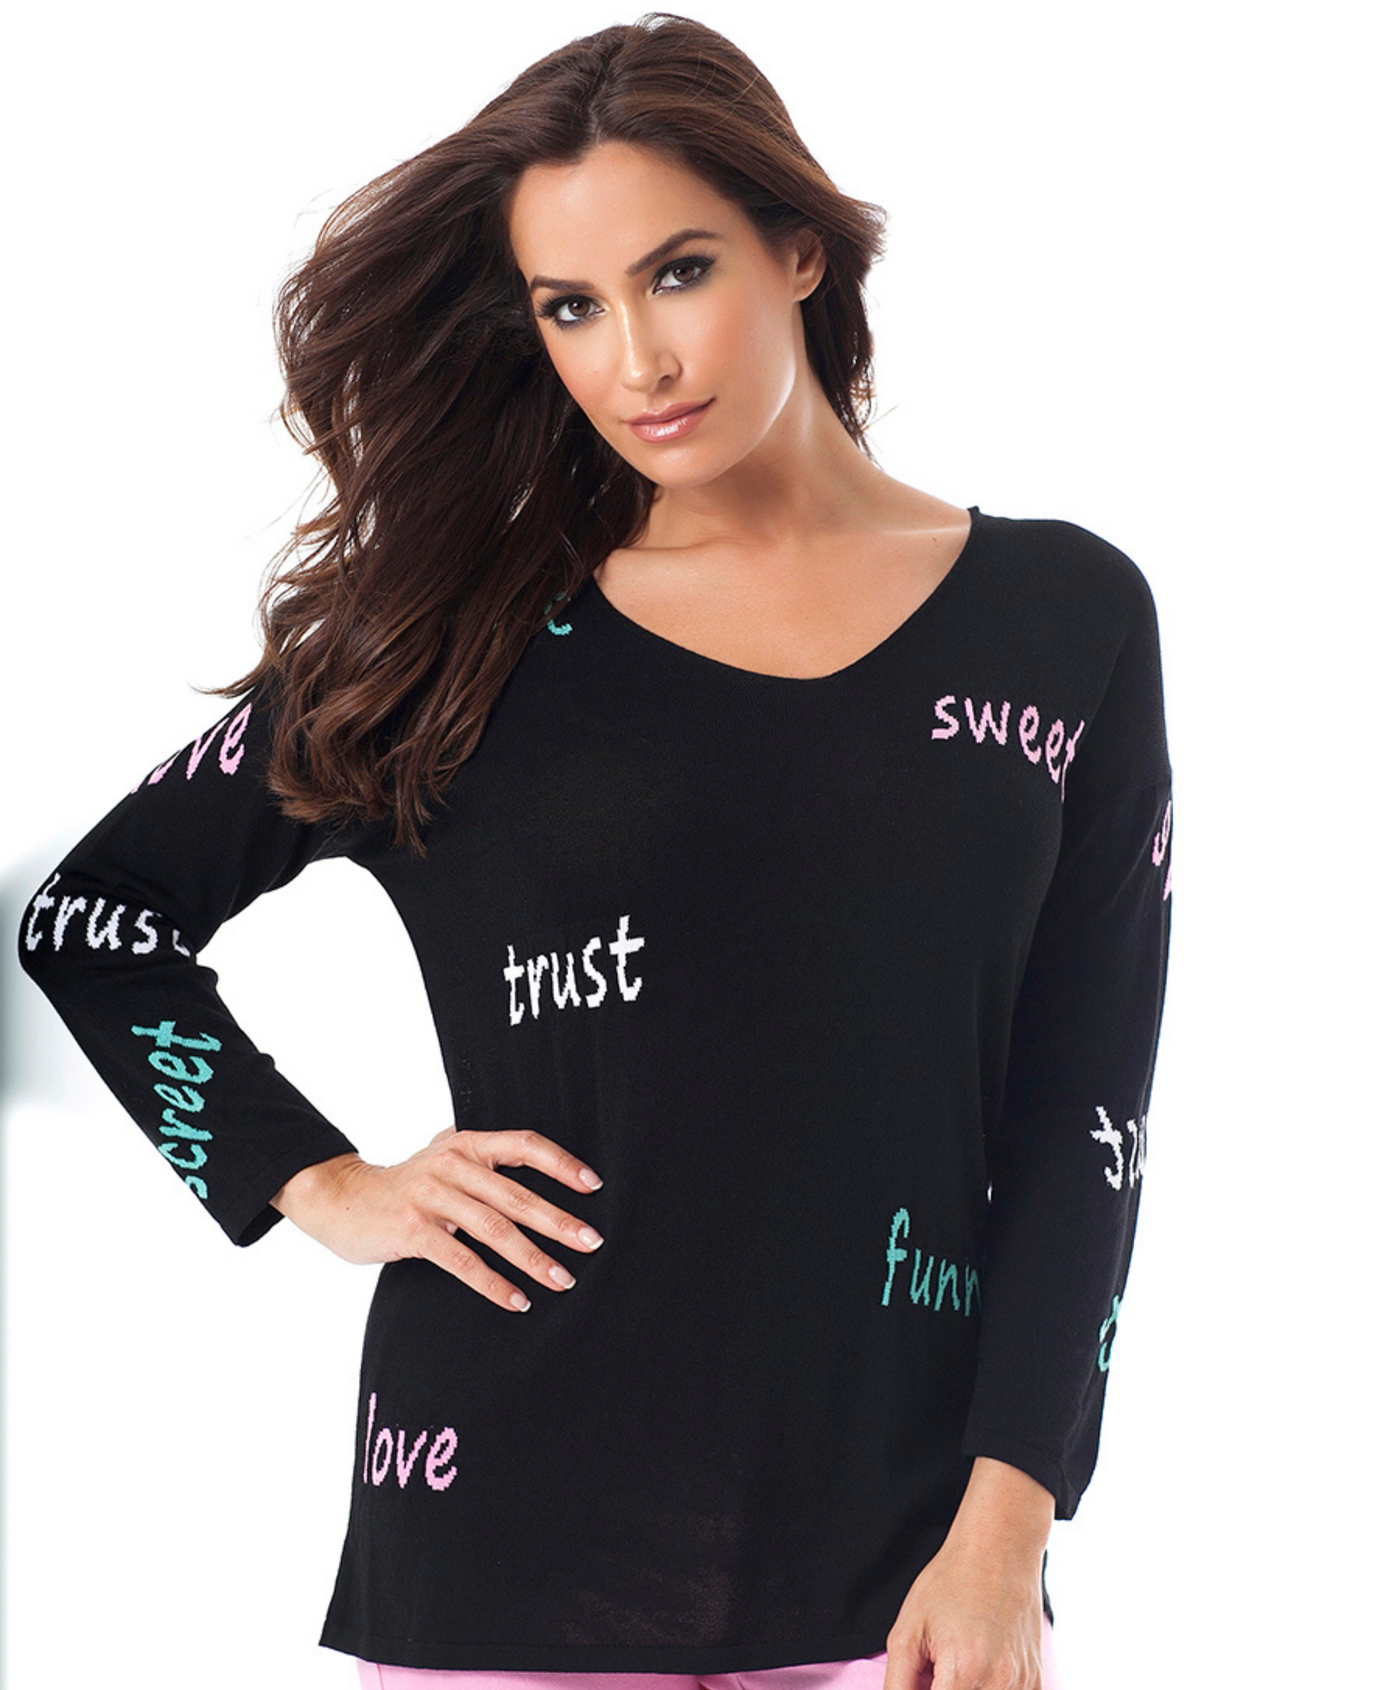 All About You Tunic